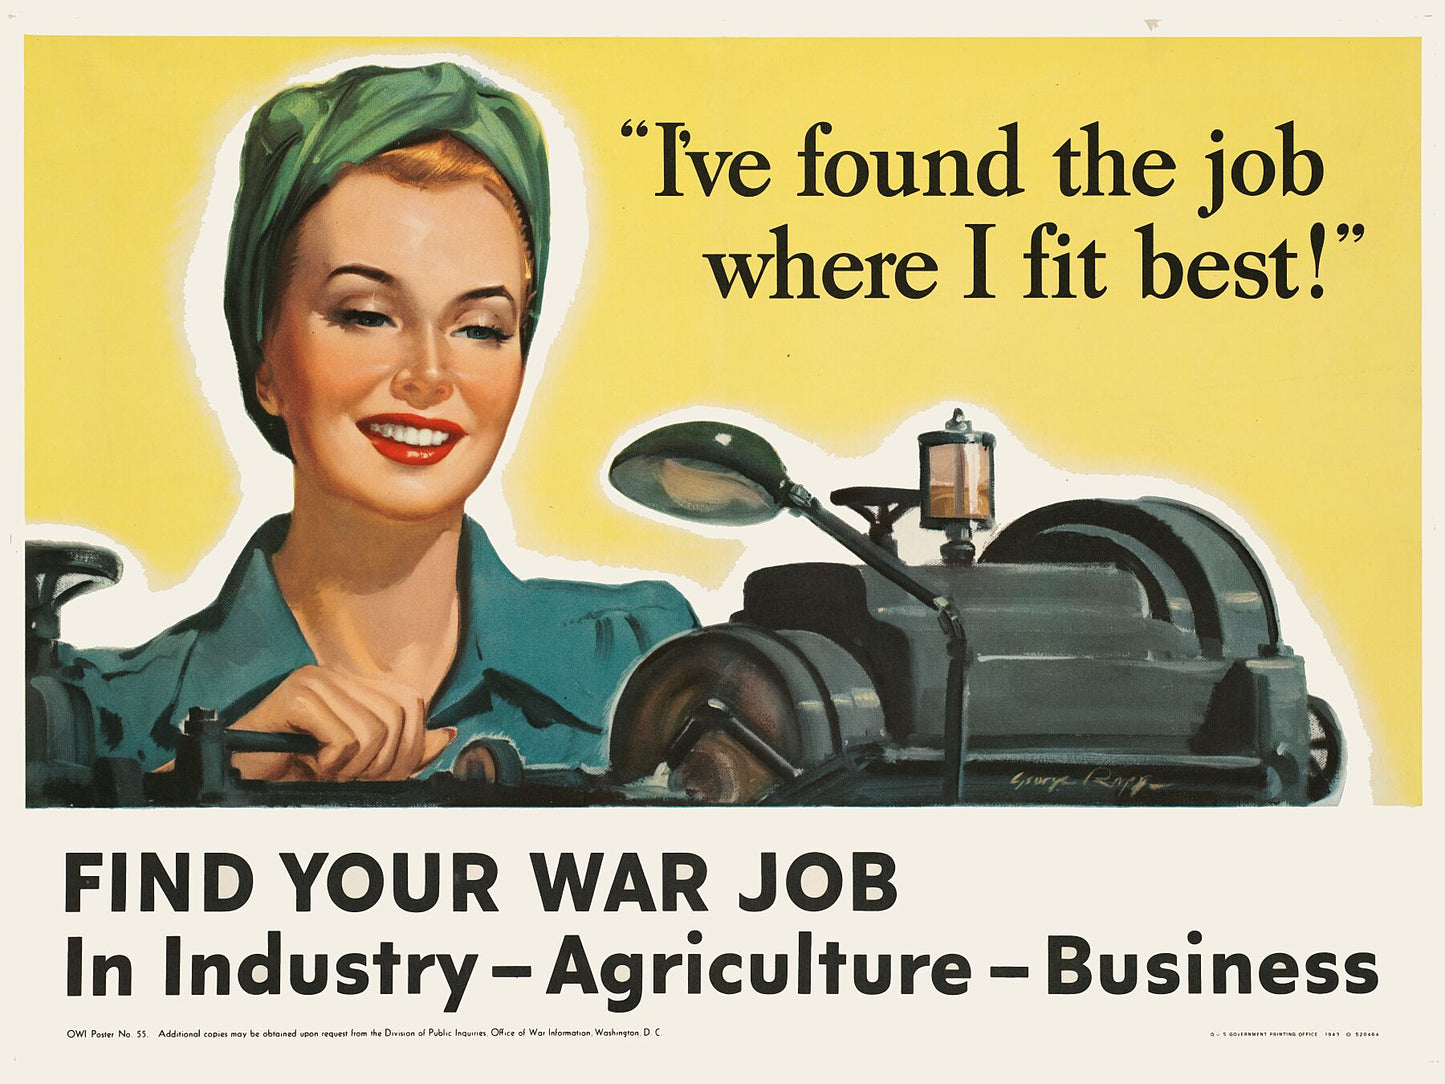 Find Your War Job by George Roepp - c.1943